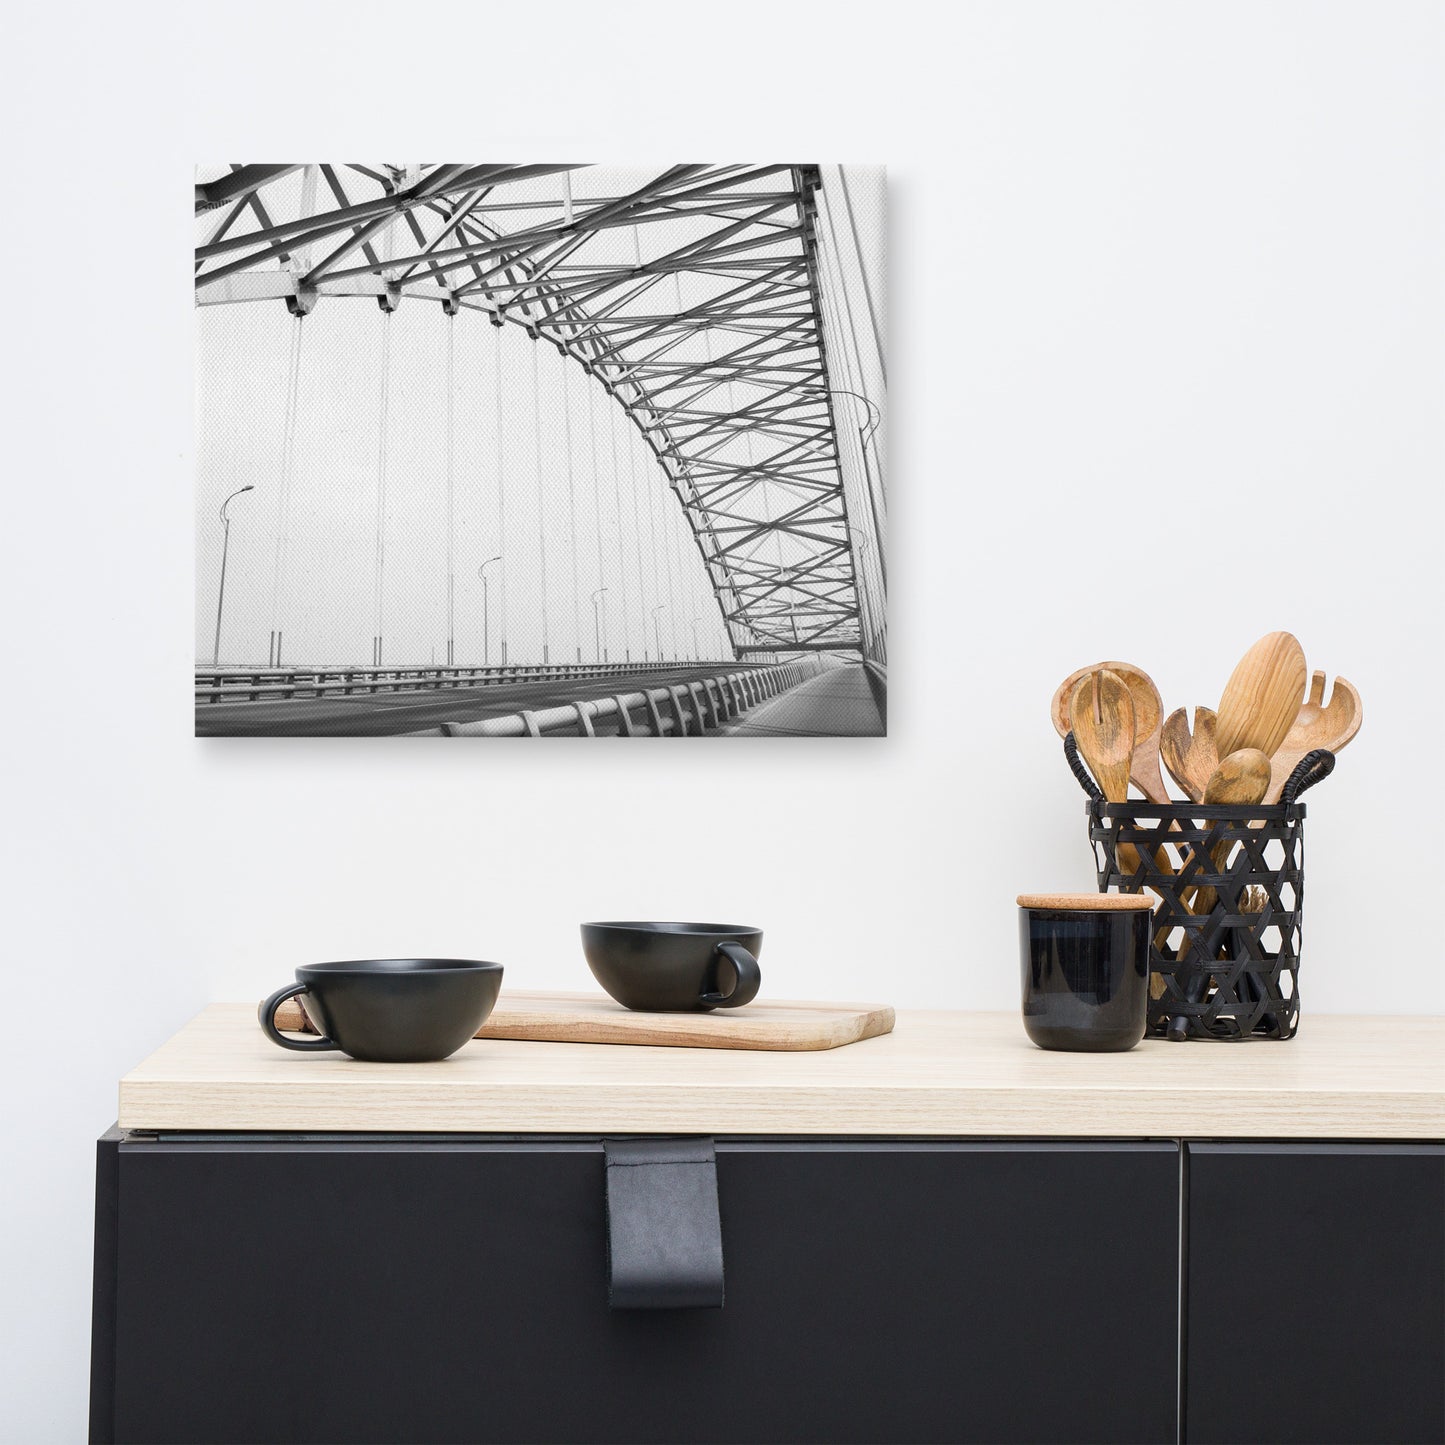 Ethereal Crossing Architectural Photograph Canvas Wall Art Print